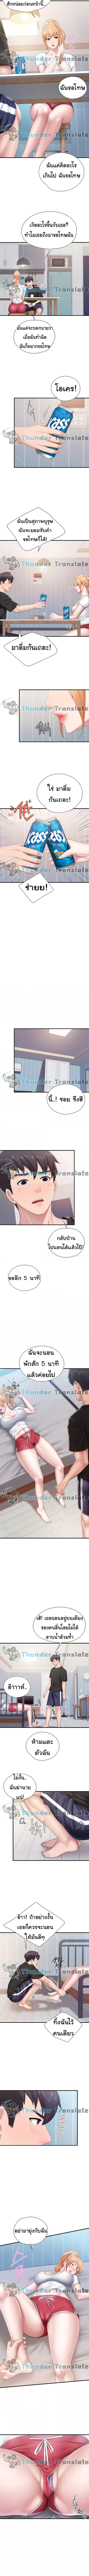 Welcome To Kids Cafe’ 24 ภาพ 3